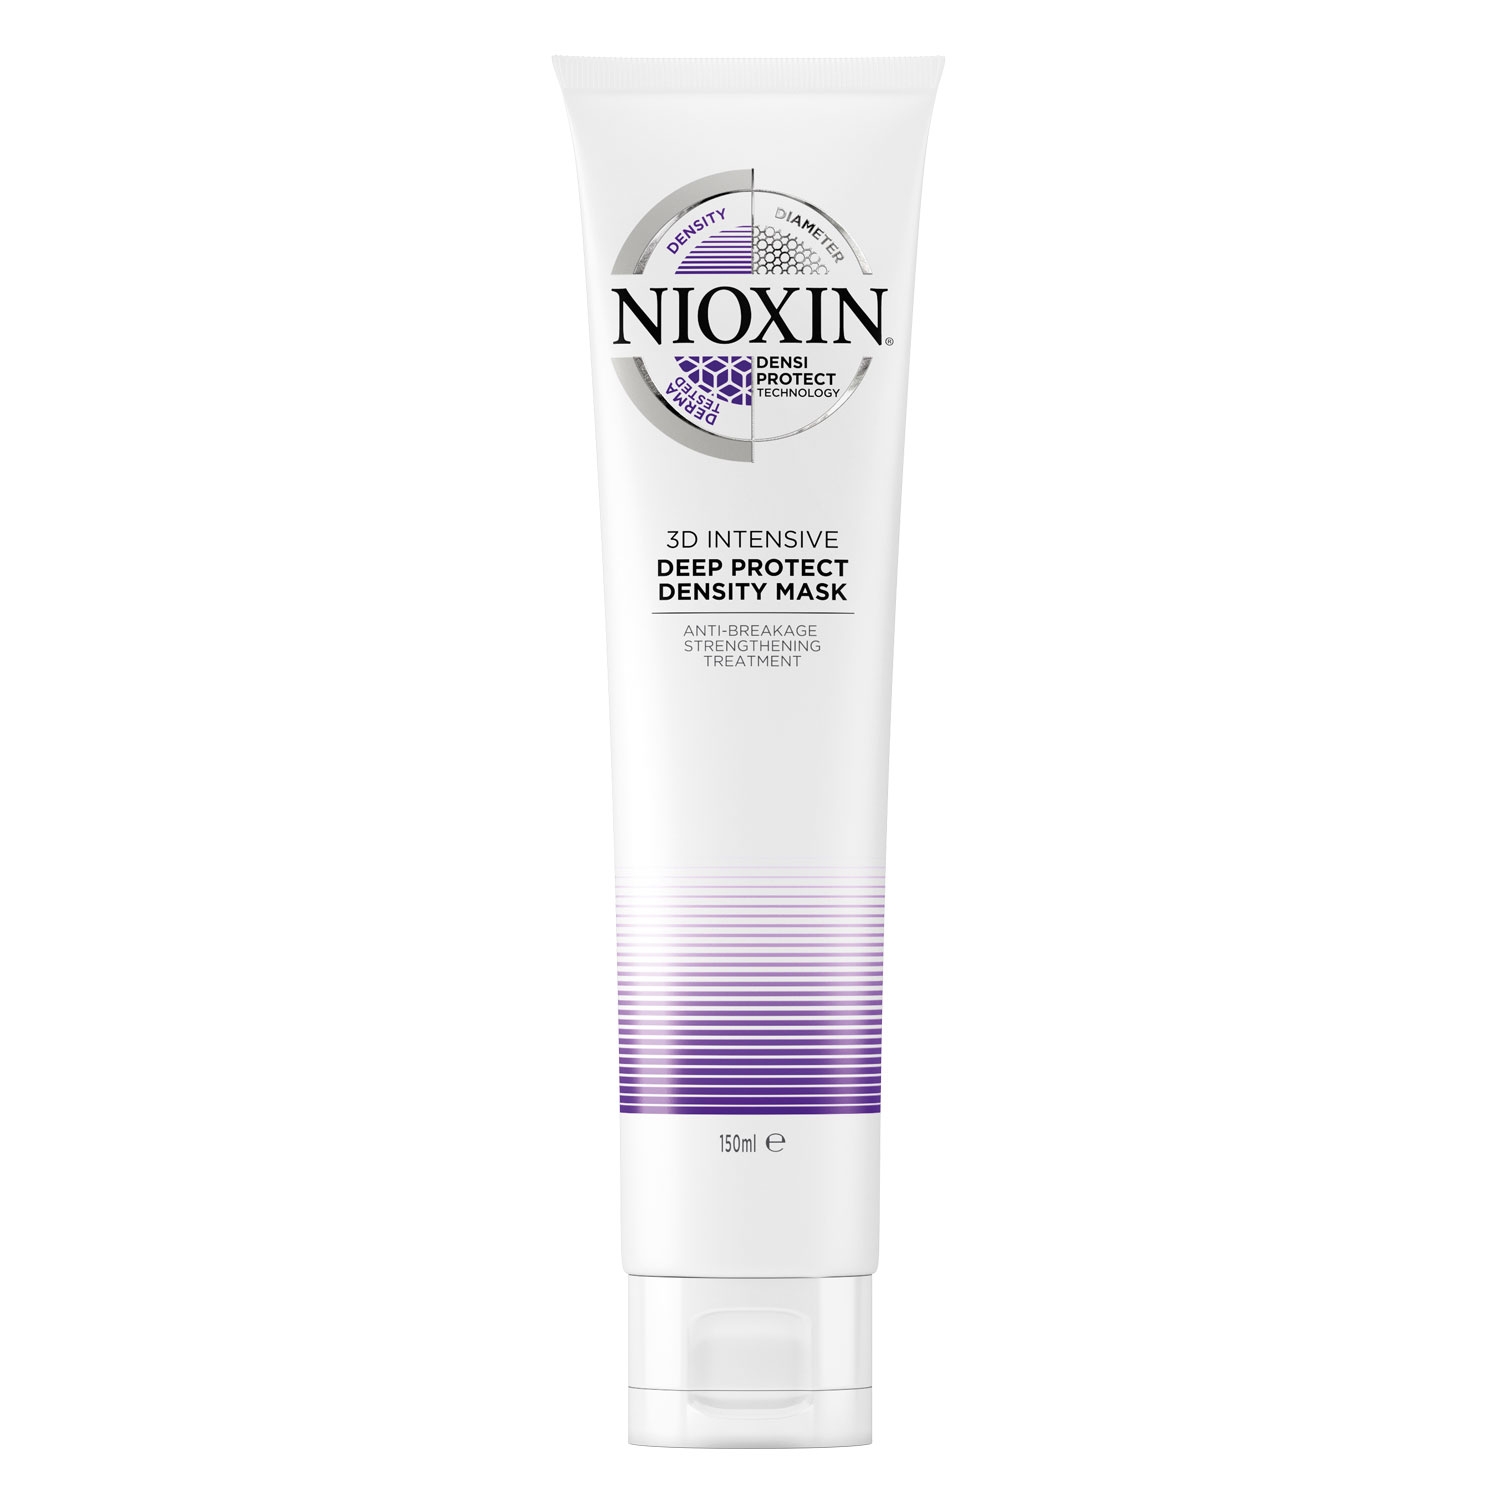 Product image from Nioxin - Deep Protect Density Mask